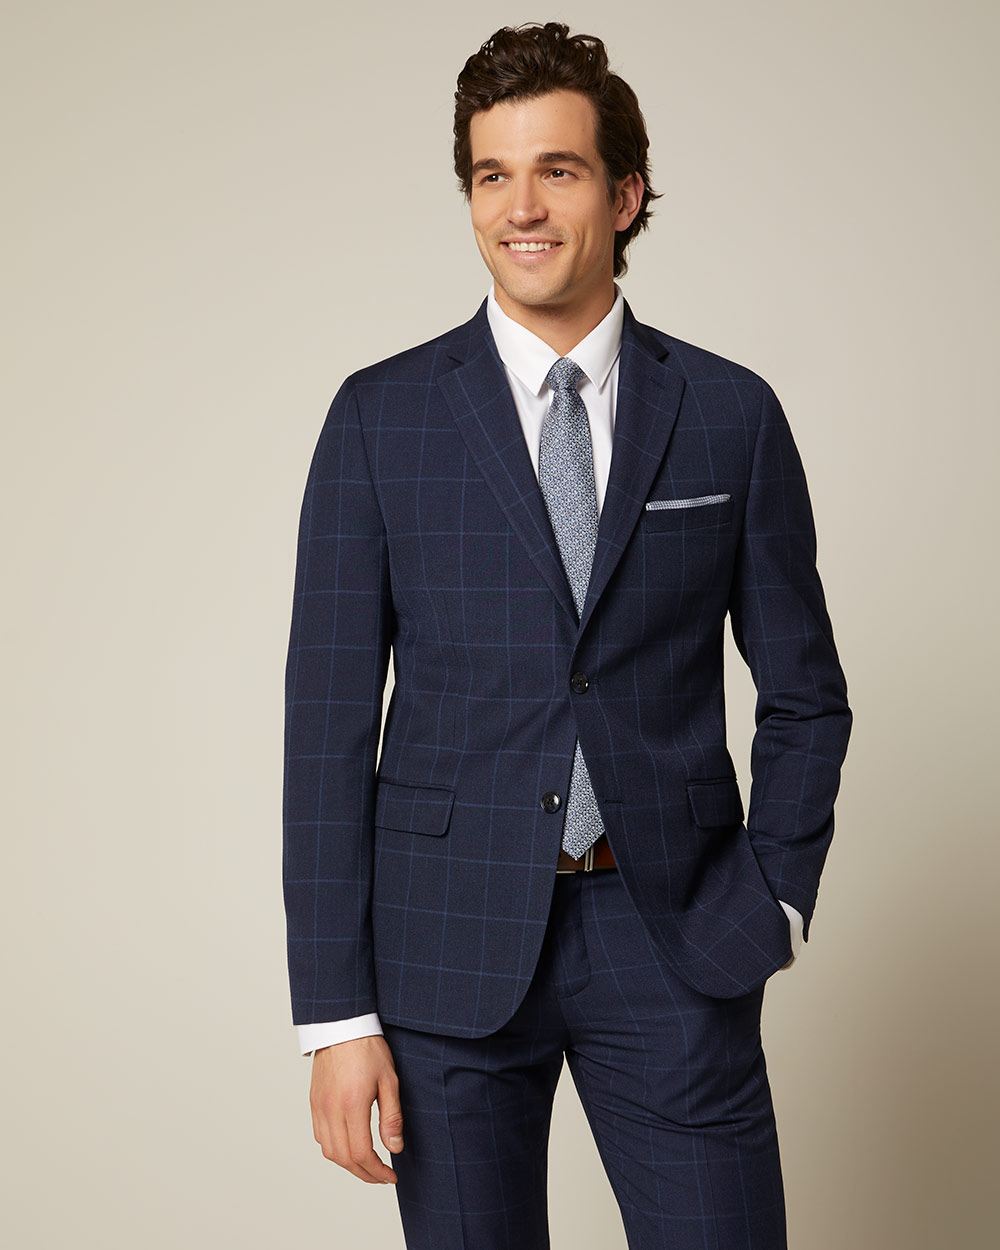 Tailored Fit navy check suit blazer - Tall | RW&CO.